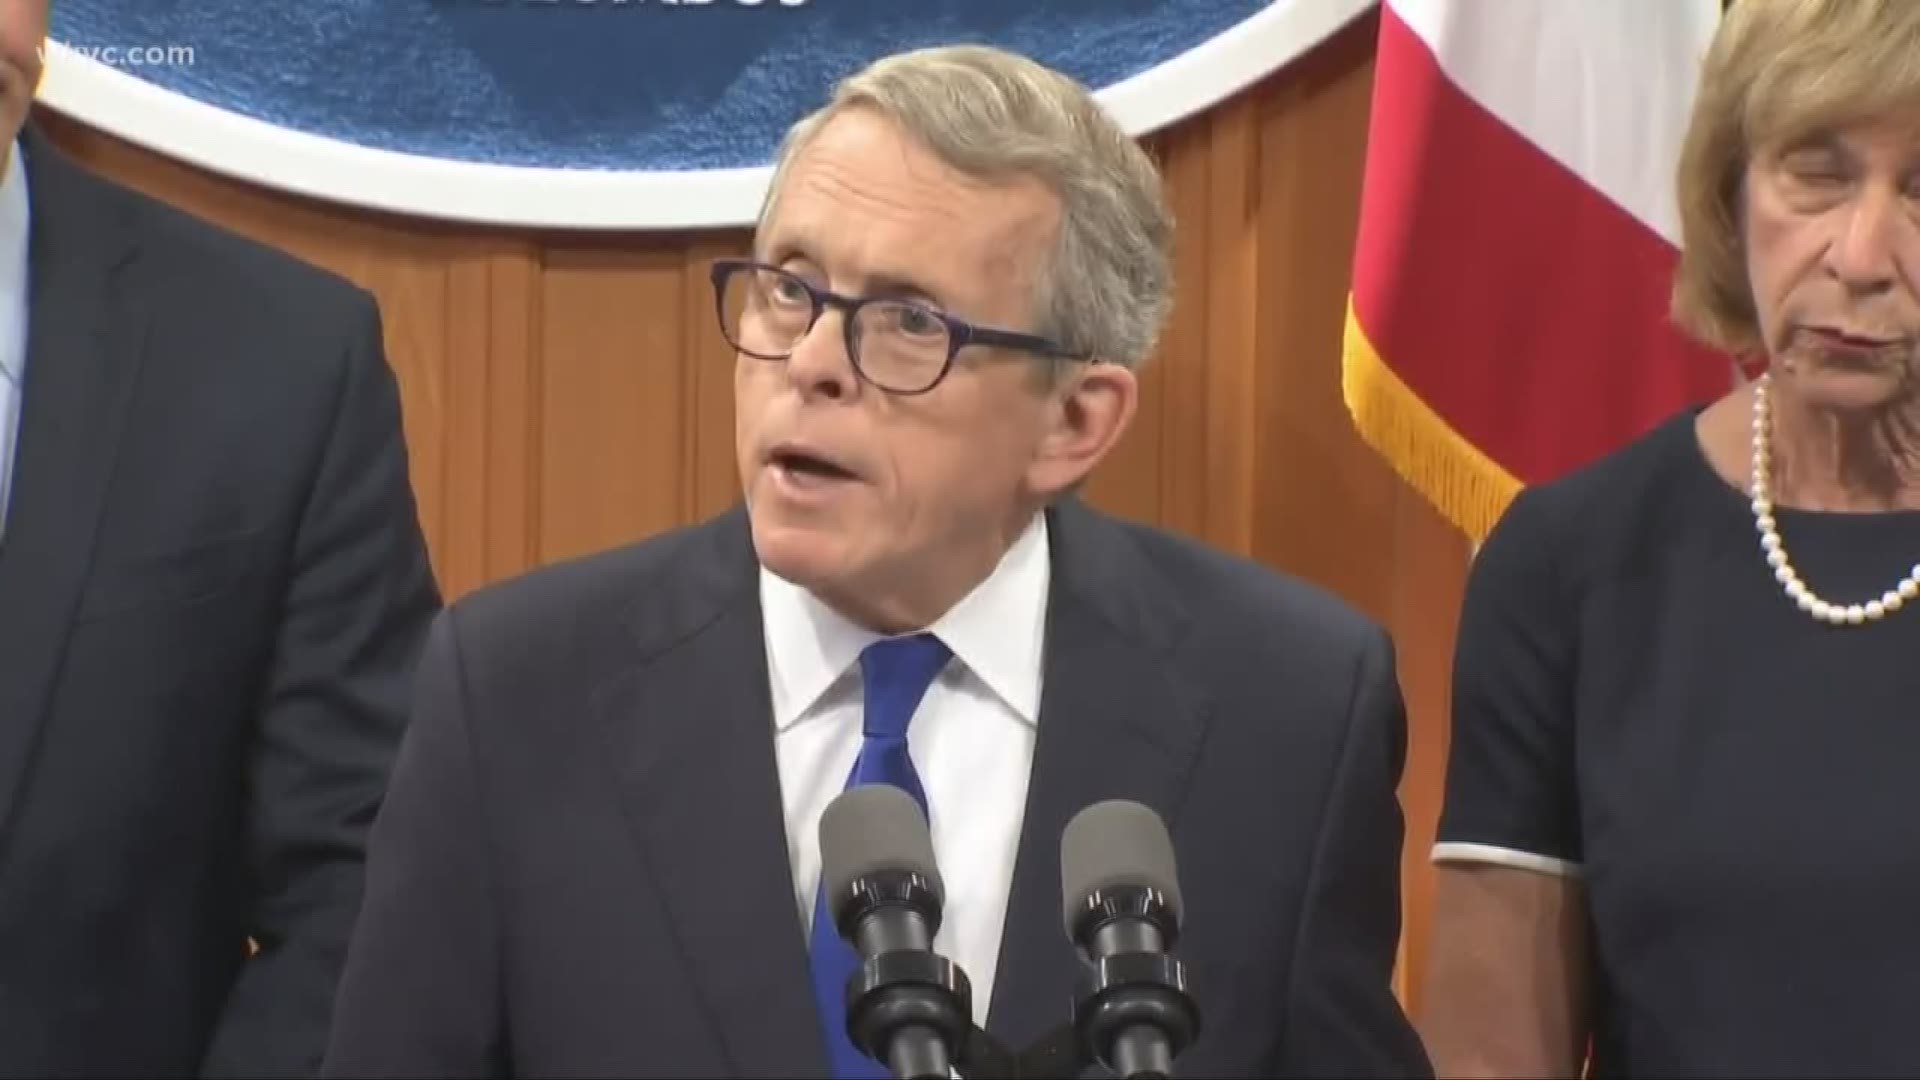 Gov. Mike DeWine proposes background checks for all gun sales in Ohio amid  multi-step plan to reduce deadly violence 